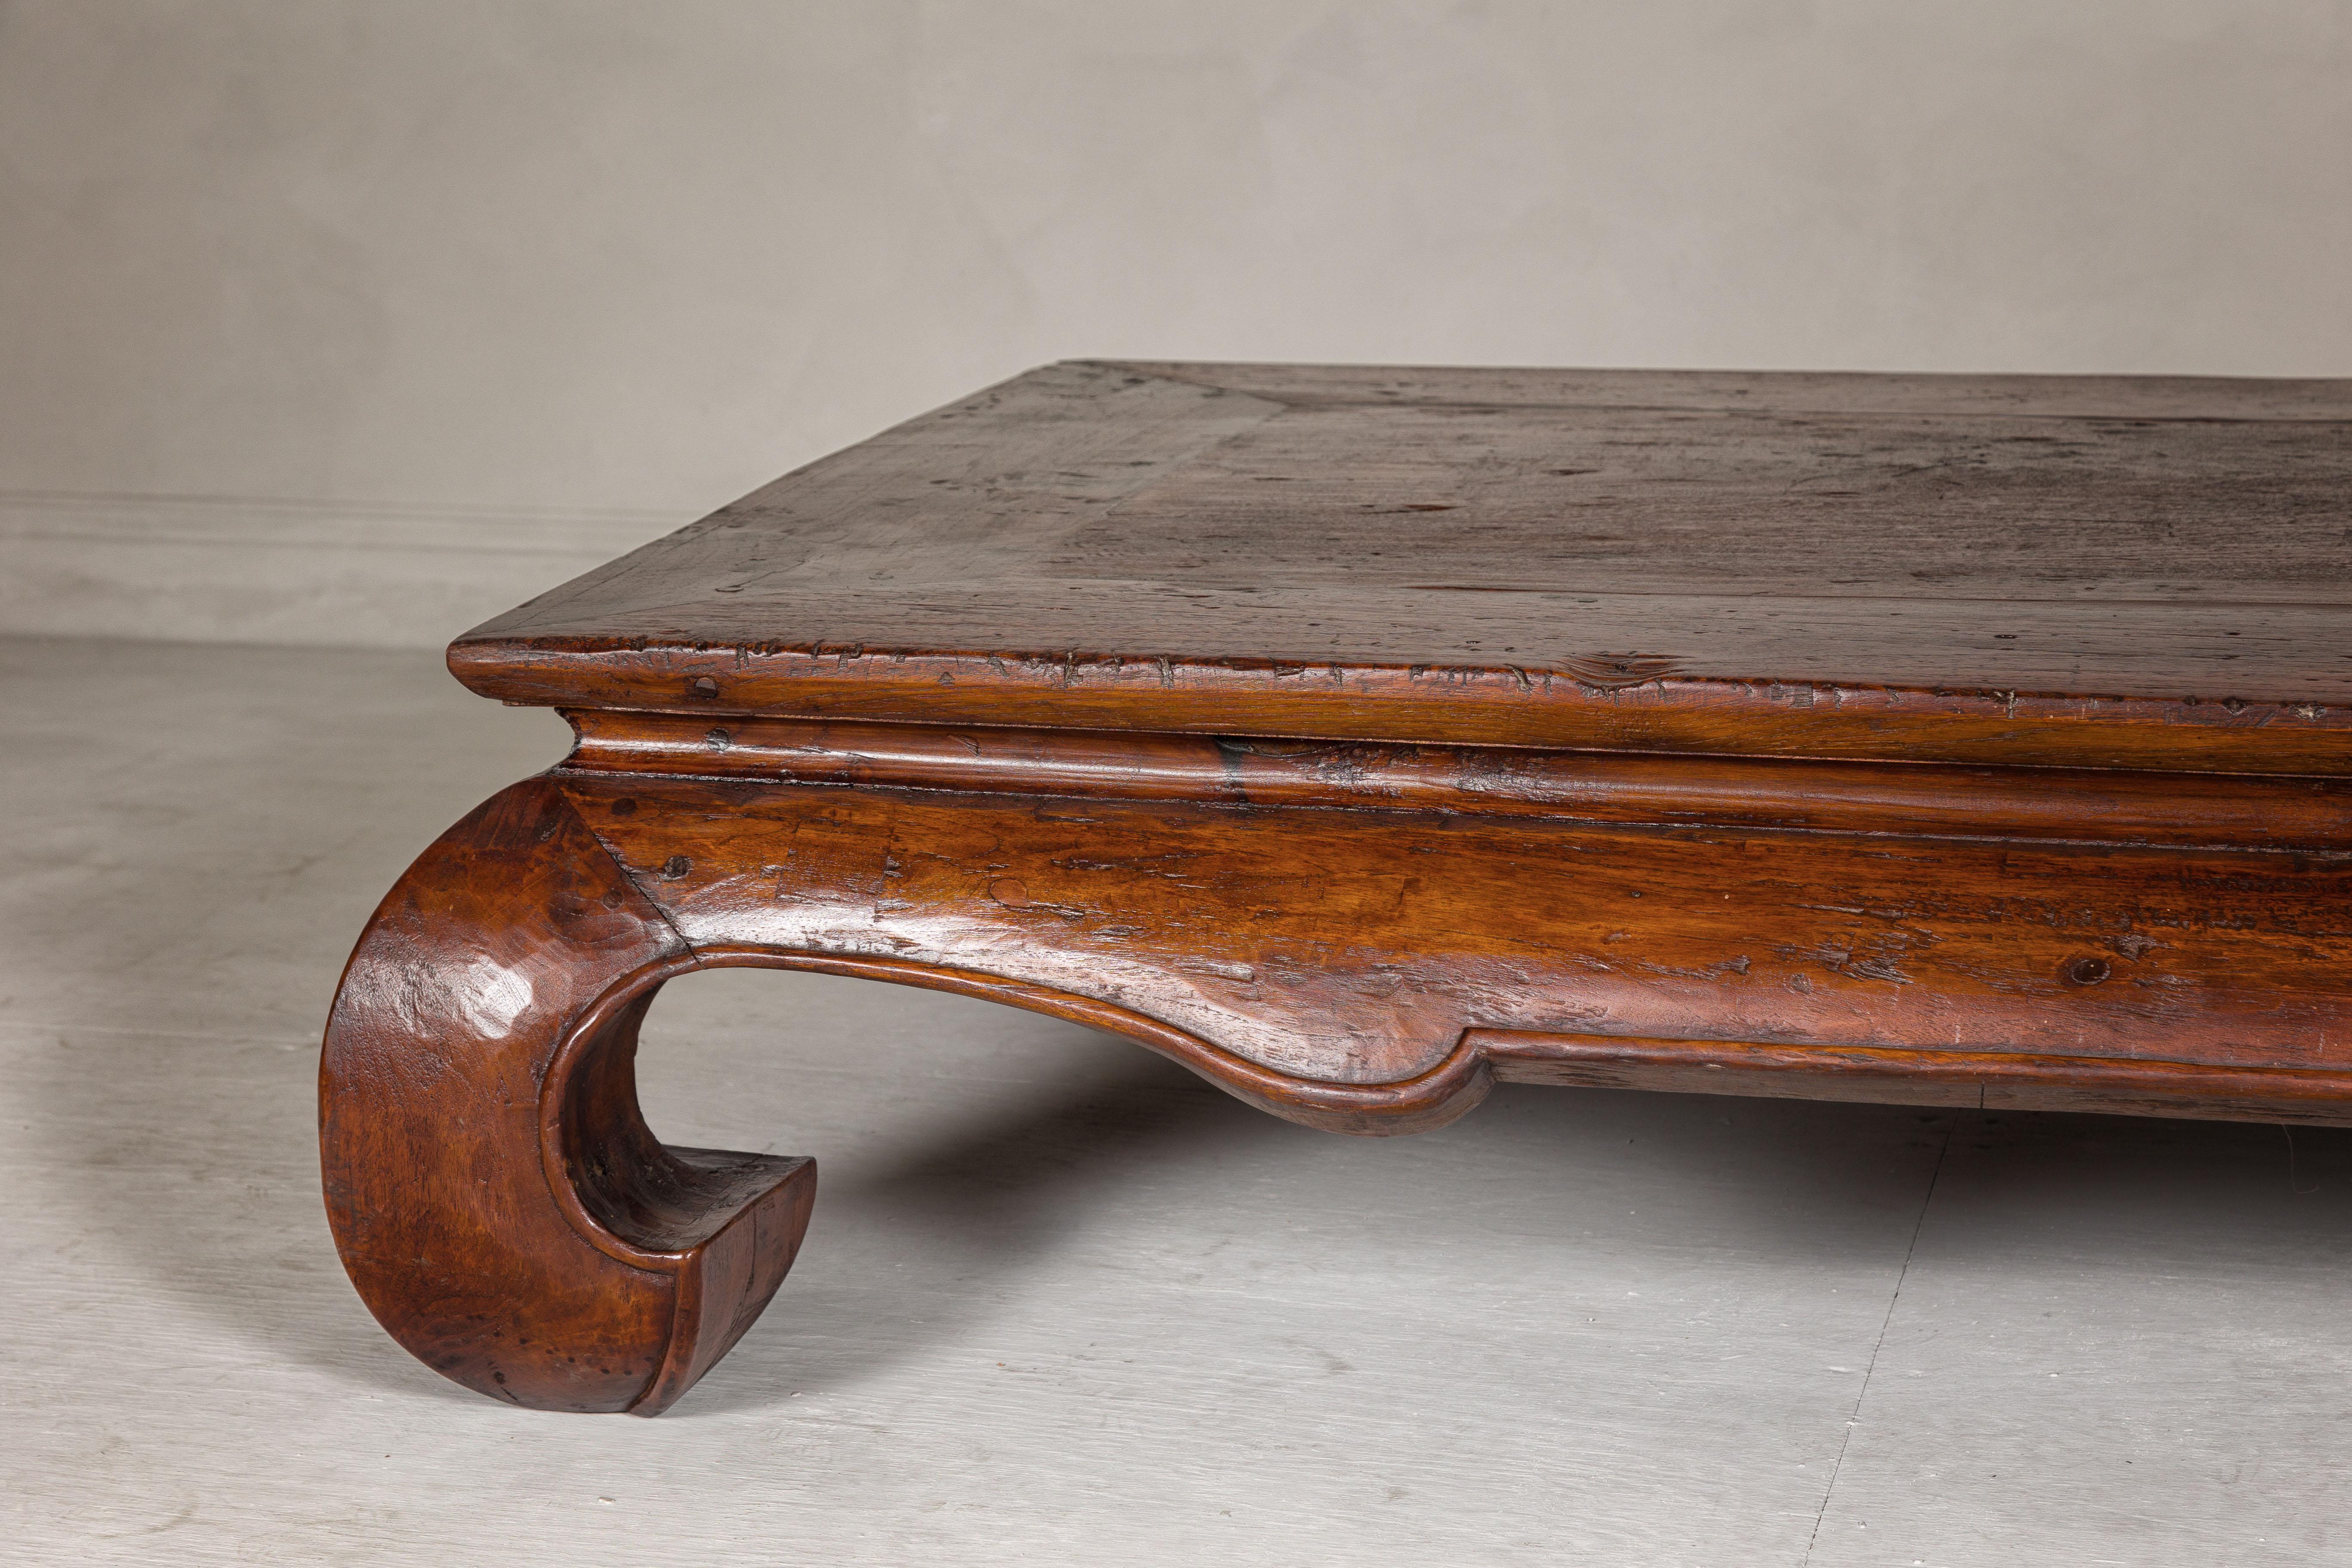 Wood Qing Dynasty 19th Century Chow Leg Kang Table with Weathered Rustic Patina For Sale